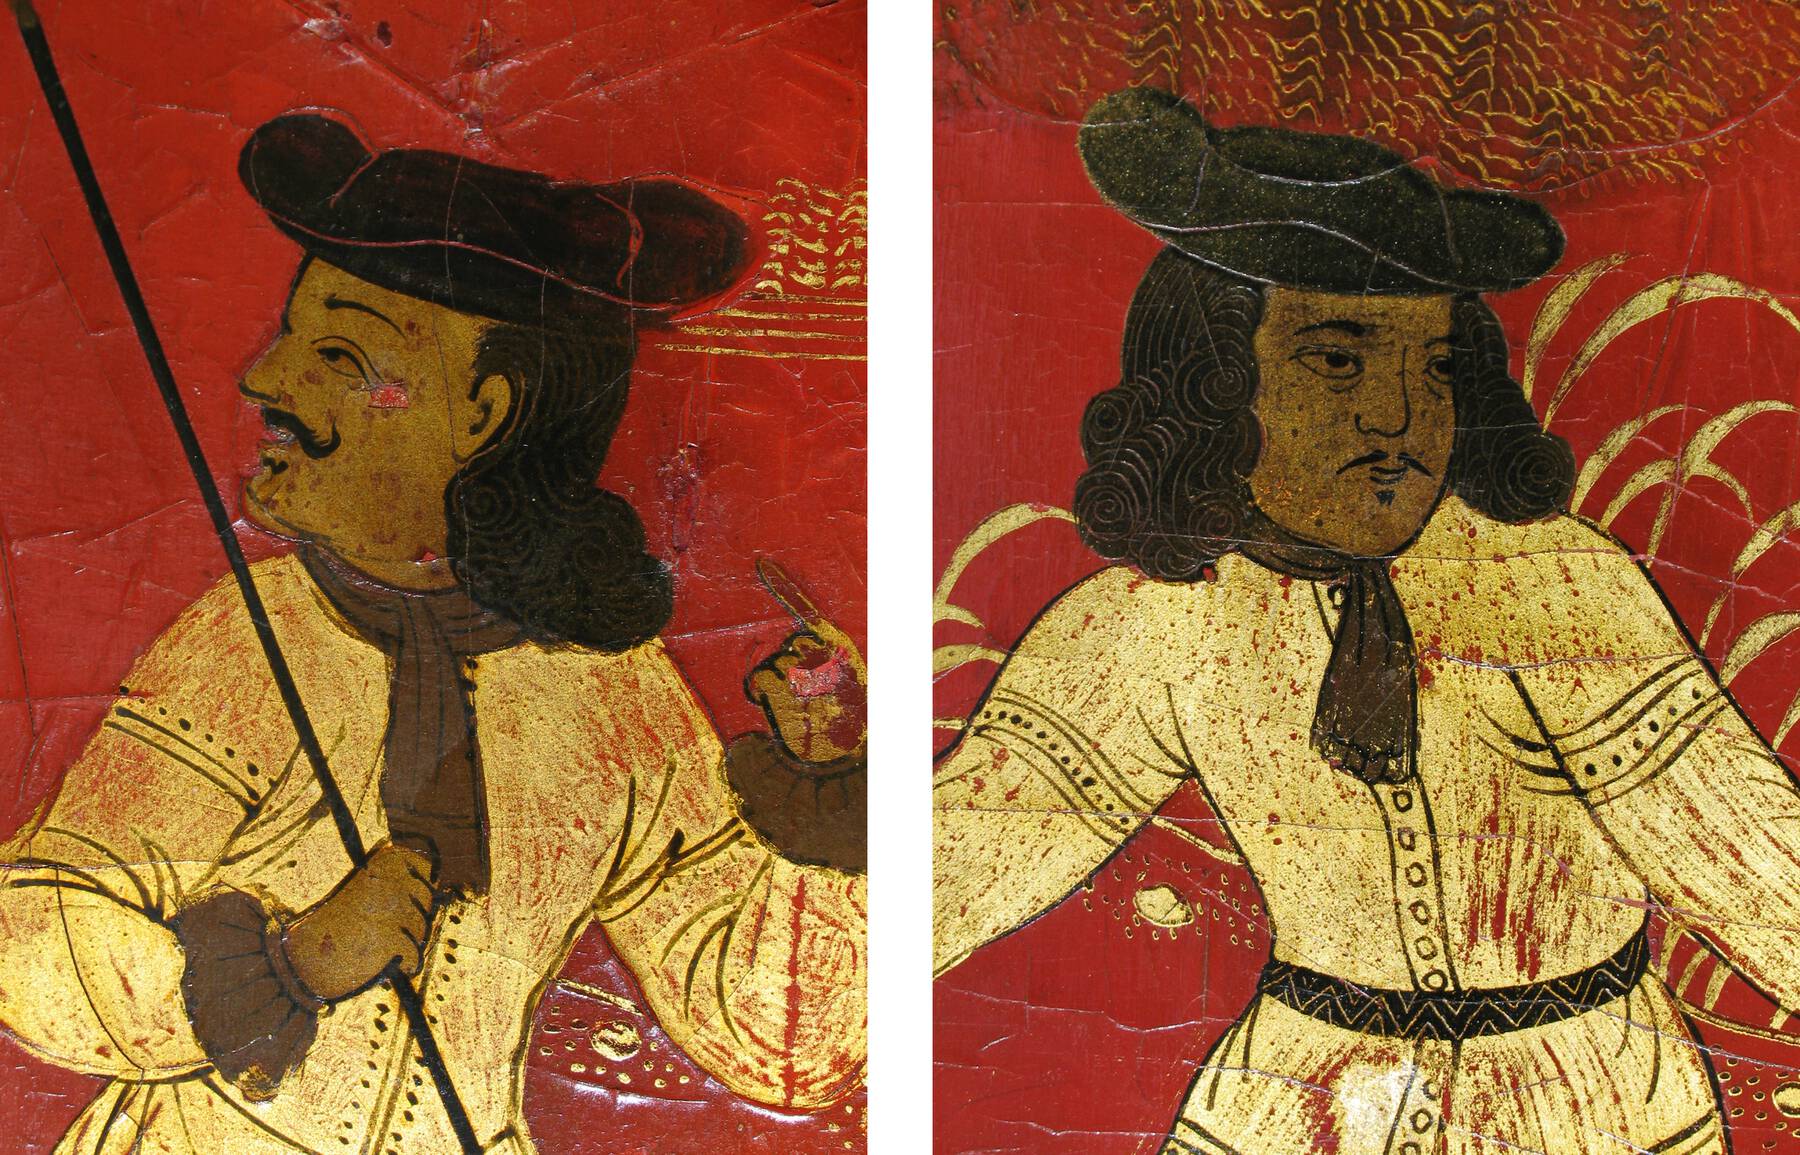 two details of lacquer figures, the one on the left has cracks on its face and hand revealing the red lacquer base, the one on the right, restored, has no cracks